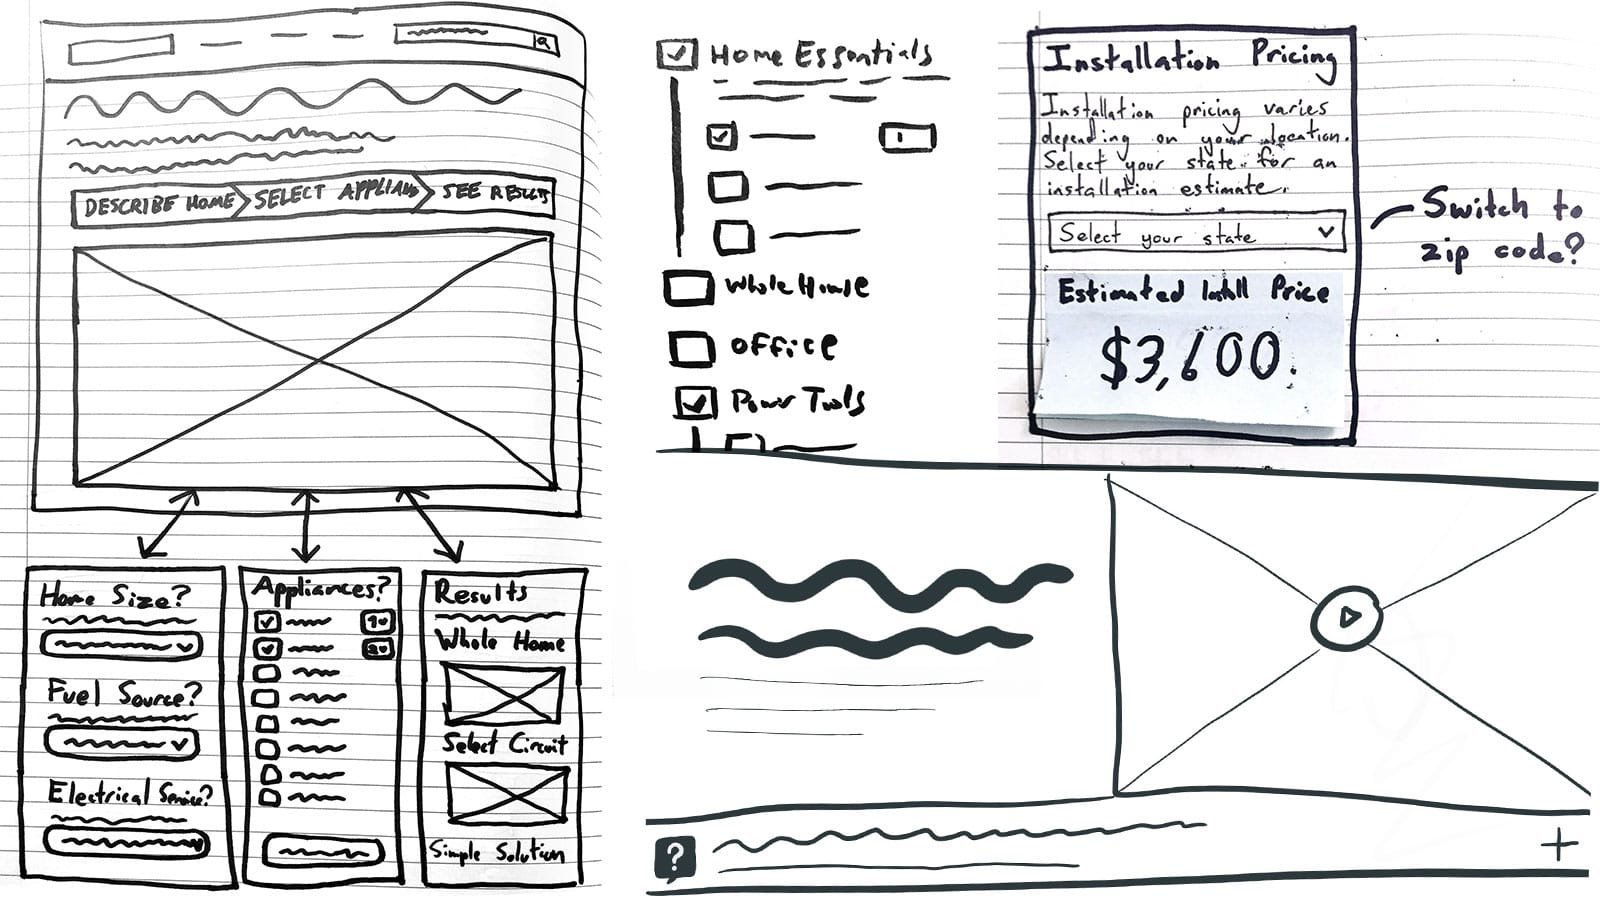 Collage of hand-drawn sketches showing various interface concepts, such as branching paths, nested checkboxes, state-based estimated pricing and a hero area with expanding help section.